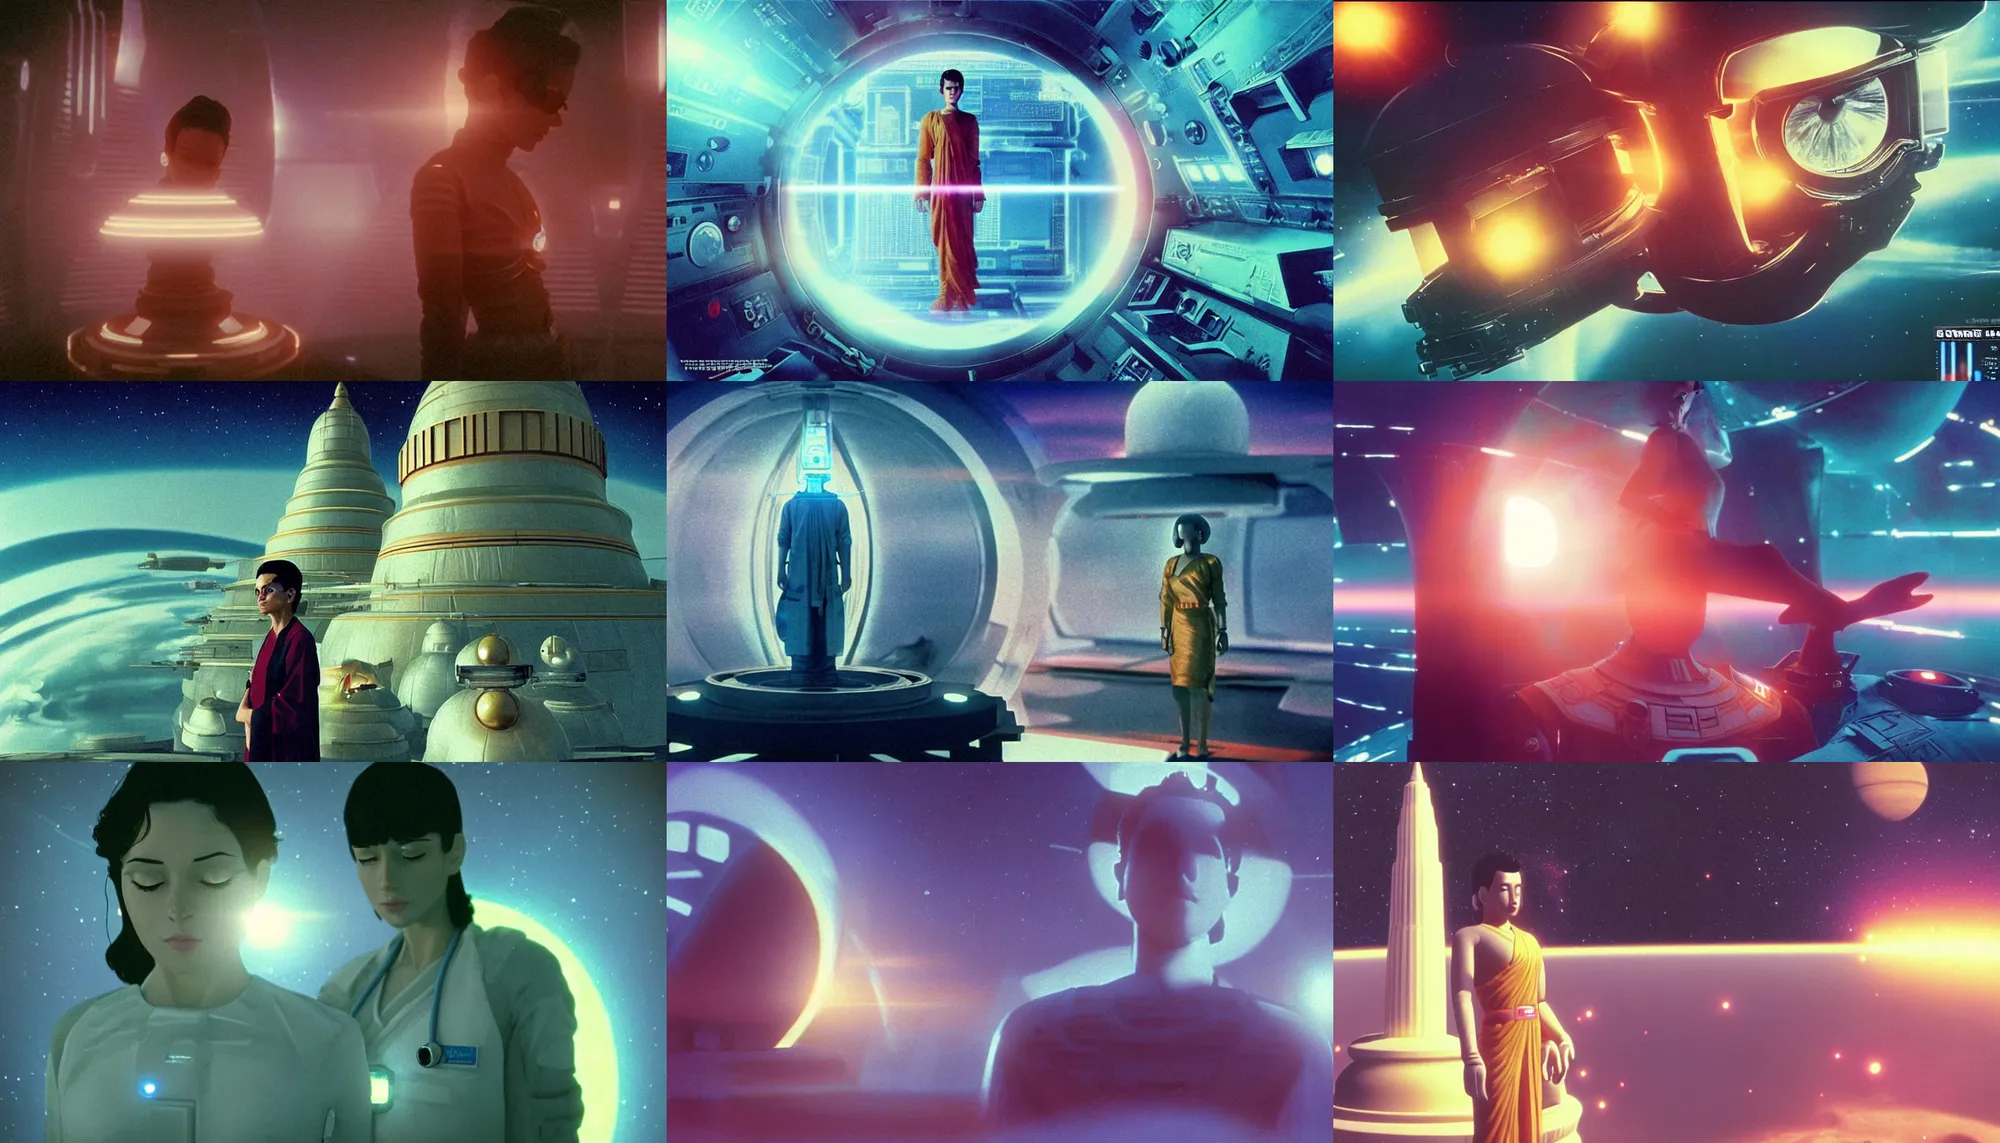 Prompt: Cinestill 50d, 8K, 35mm,J.J Abrams flare; beautiful ultra realistic vaporwave minimalistic shri yantra stupa pilot in space(1950) film still medical bay scene in 2000s frontiers in blade runner retrofuturism fashion magazine September moebius seinen manga style hyperrealism holly herndon edition, highly detailed, extreme closeup three-quarter pointé pose model portrait, tilt shift LaGrange point orbit background, three point perspective, focus on anti-g flight suit;open mouth,terrified, eye contact, soft lighting